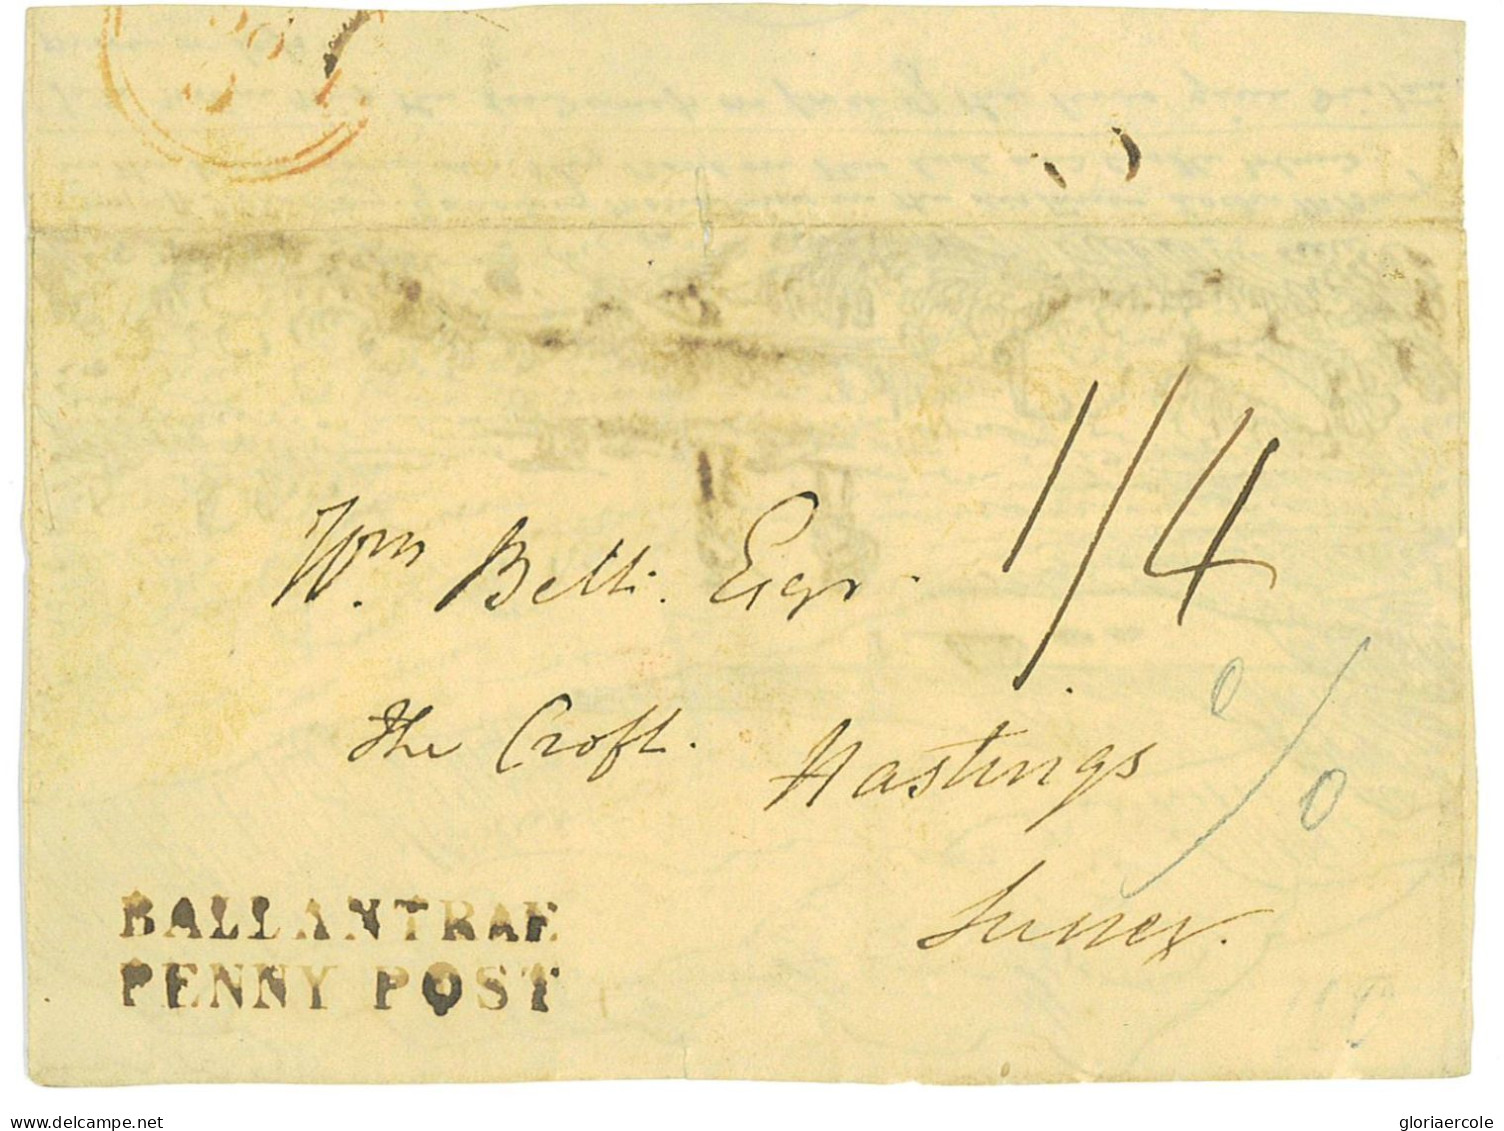 P2908 - GREAT BRITAIN PREPHILATELIC FRONT OF COVER, BUT.. WITH HAND PAINTED INSIDE!! FROM BALLANTRAE PENNY POST (SCARCE) - ...-1840 Préphilatélie